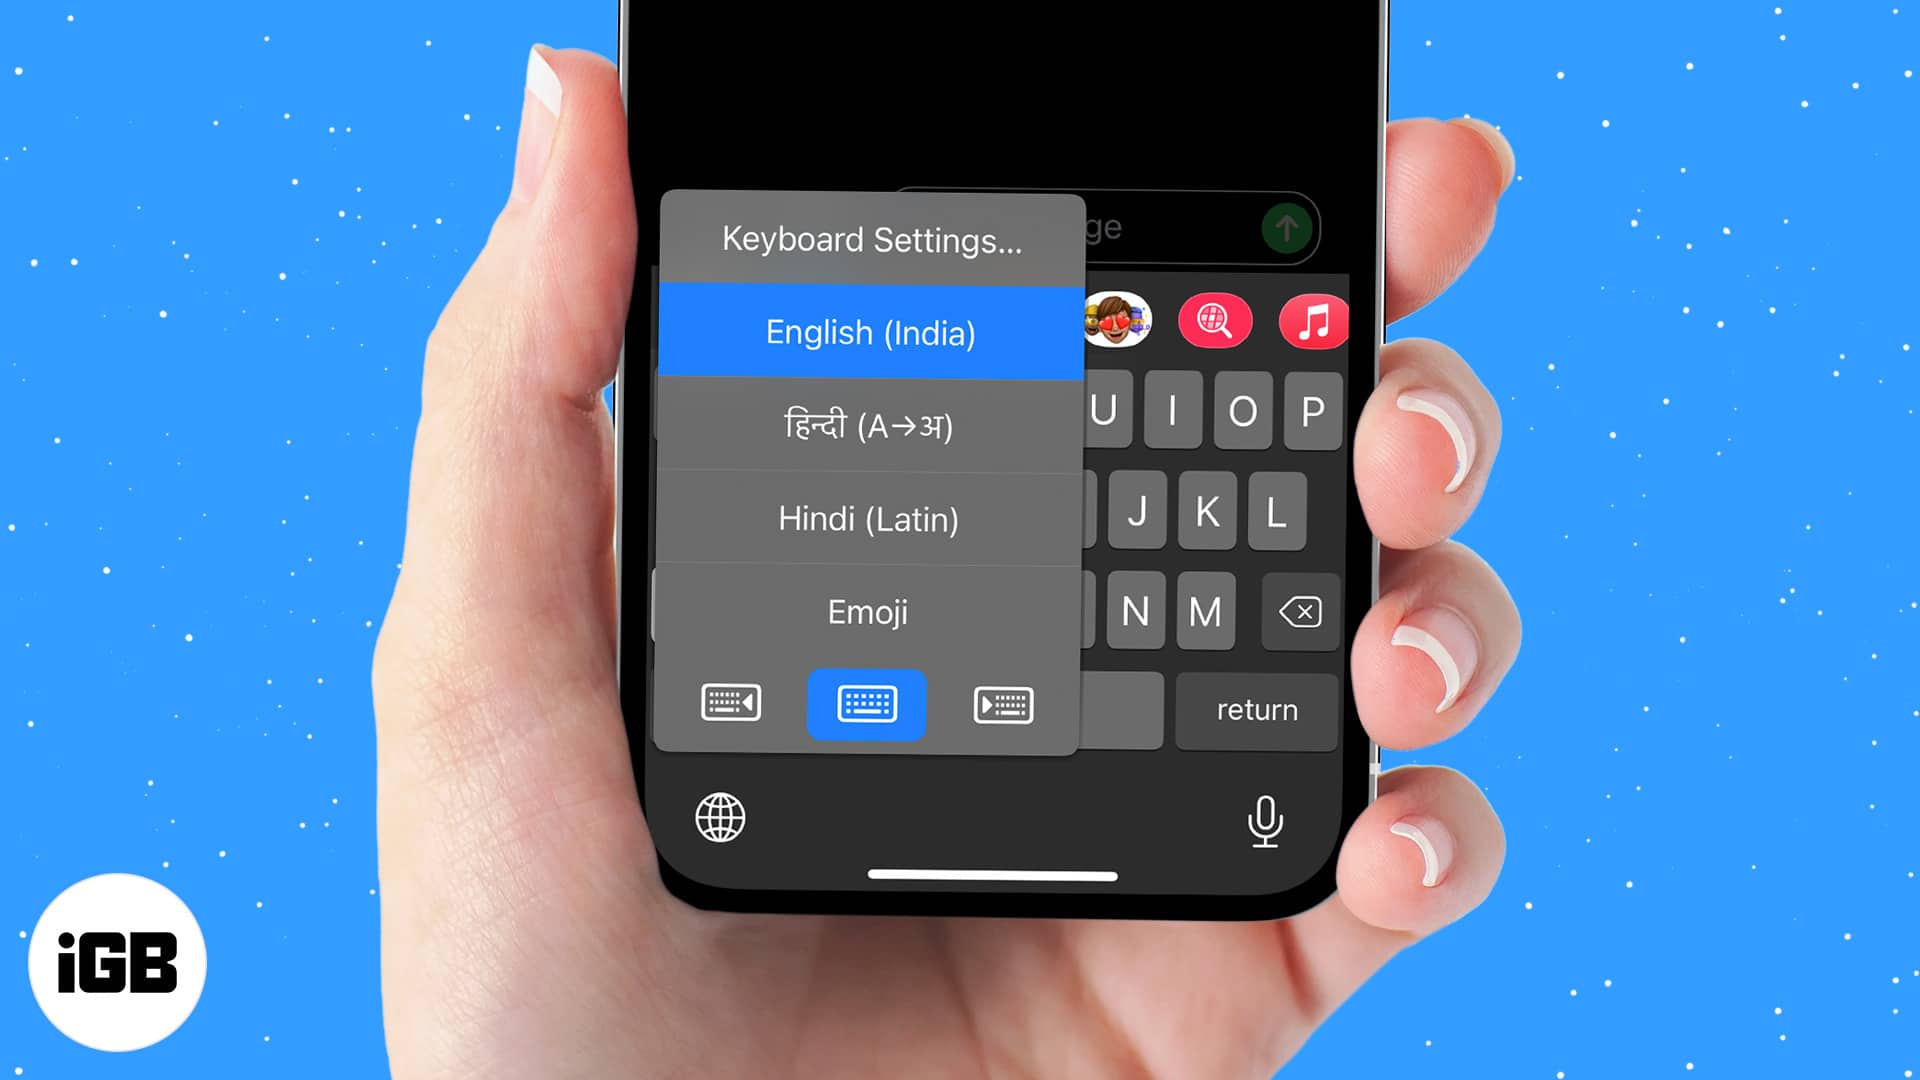 How to add or change keyboard on iPhone